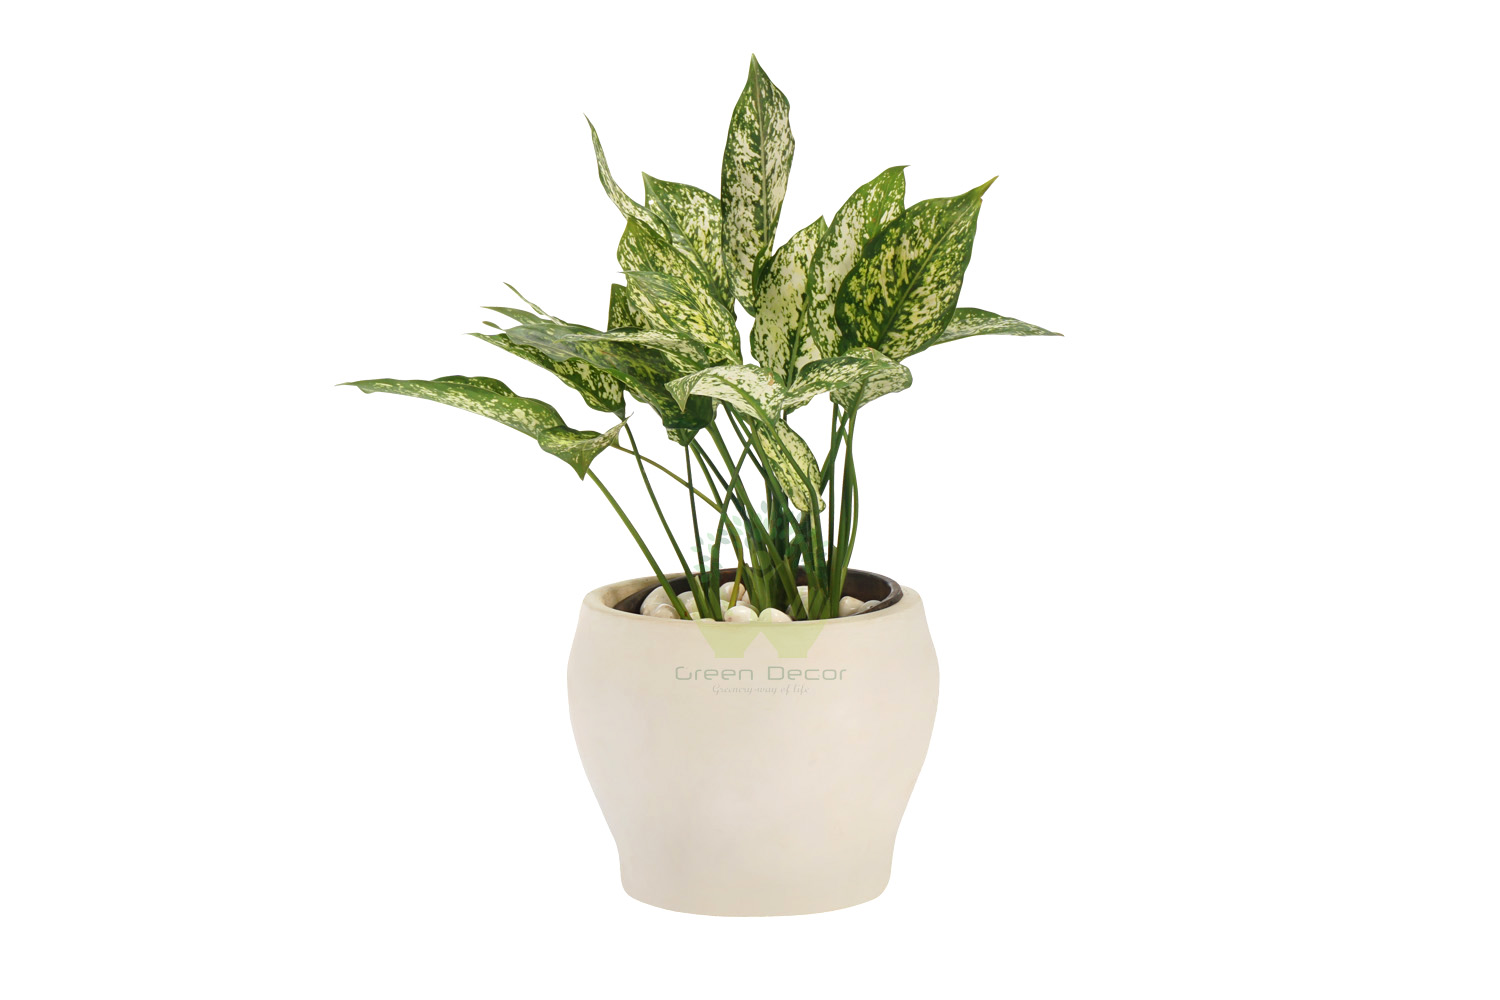 Buy Agloanema White Plants Front VIew, White Pots and seeds in Delhi NCR by the best online nursery shop Greendecor.